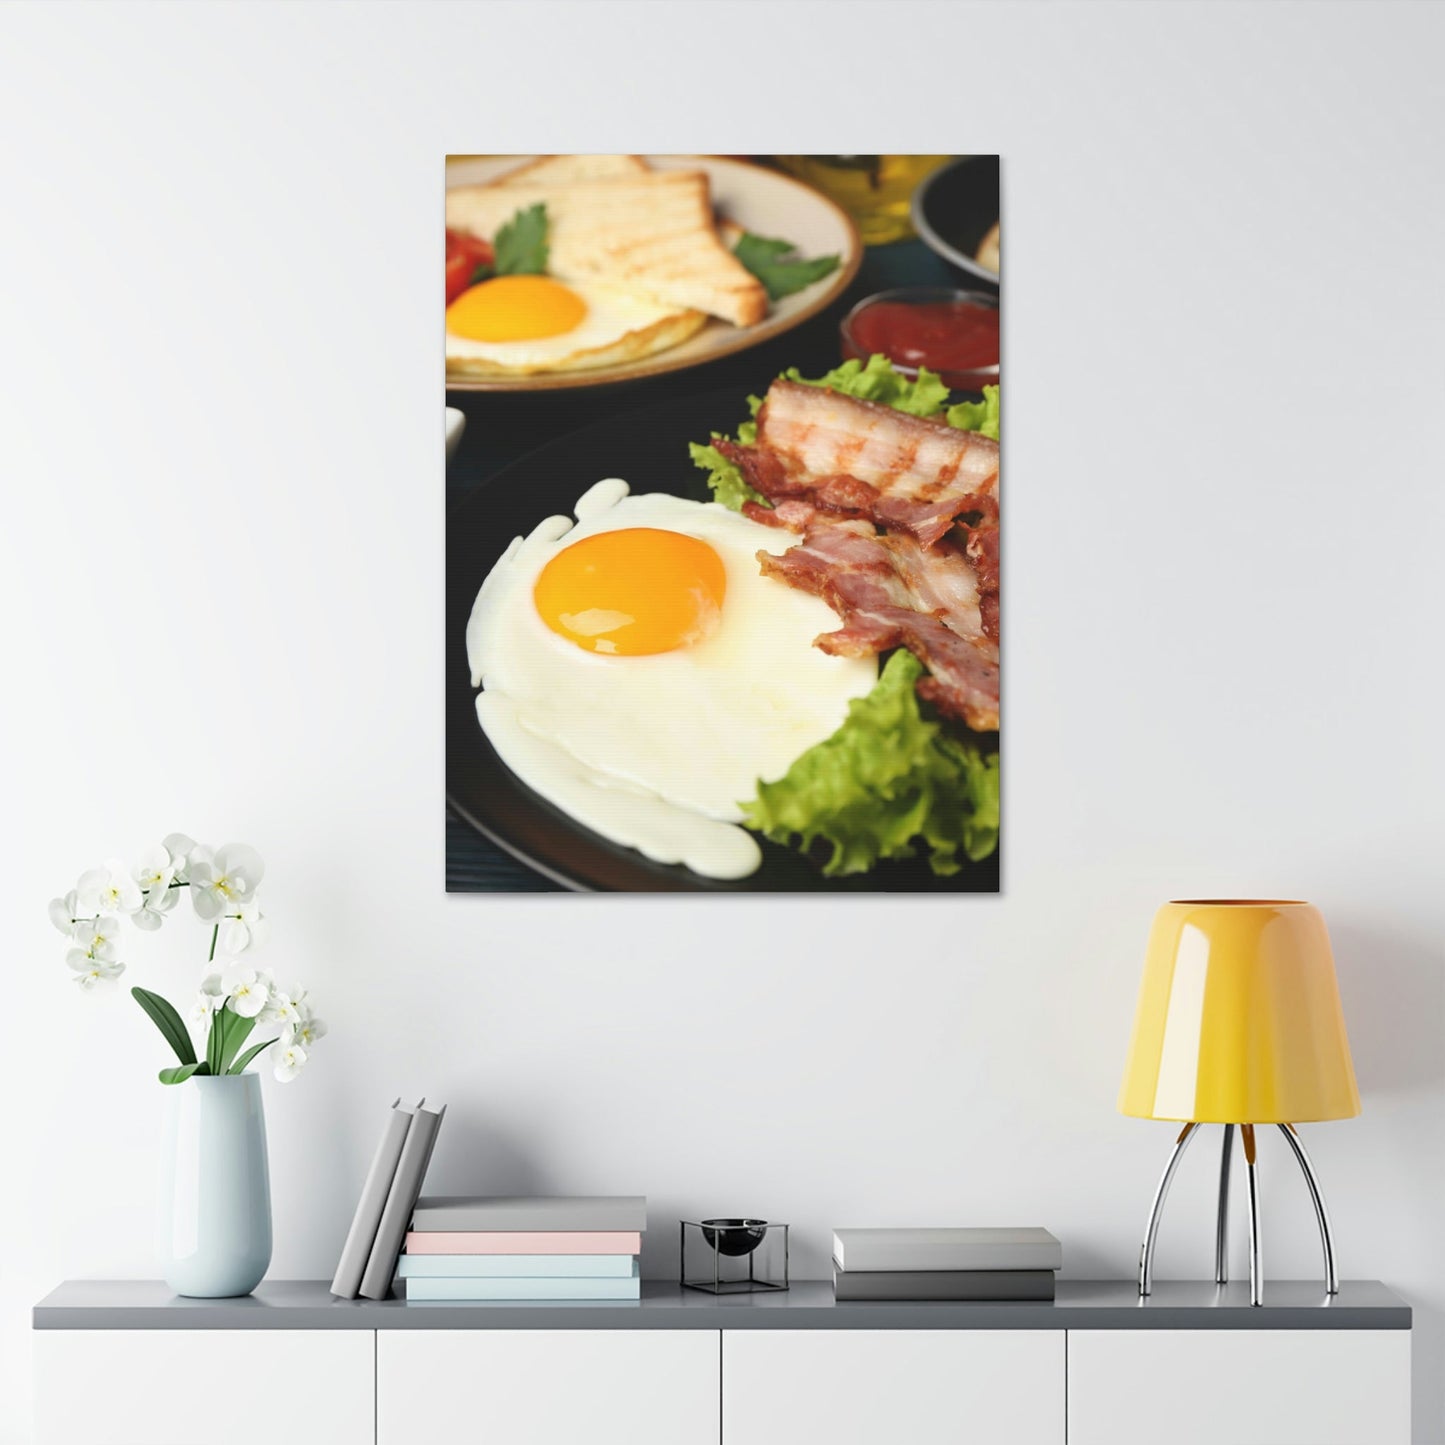 Breakfast Bliss: Canvas Print of a Relaxing Morning Moment